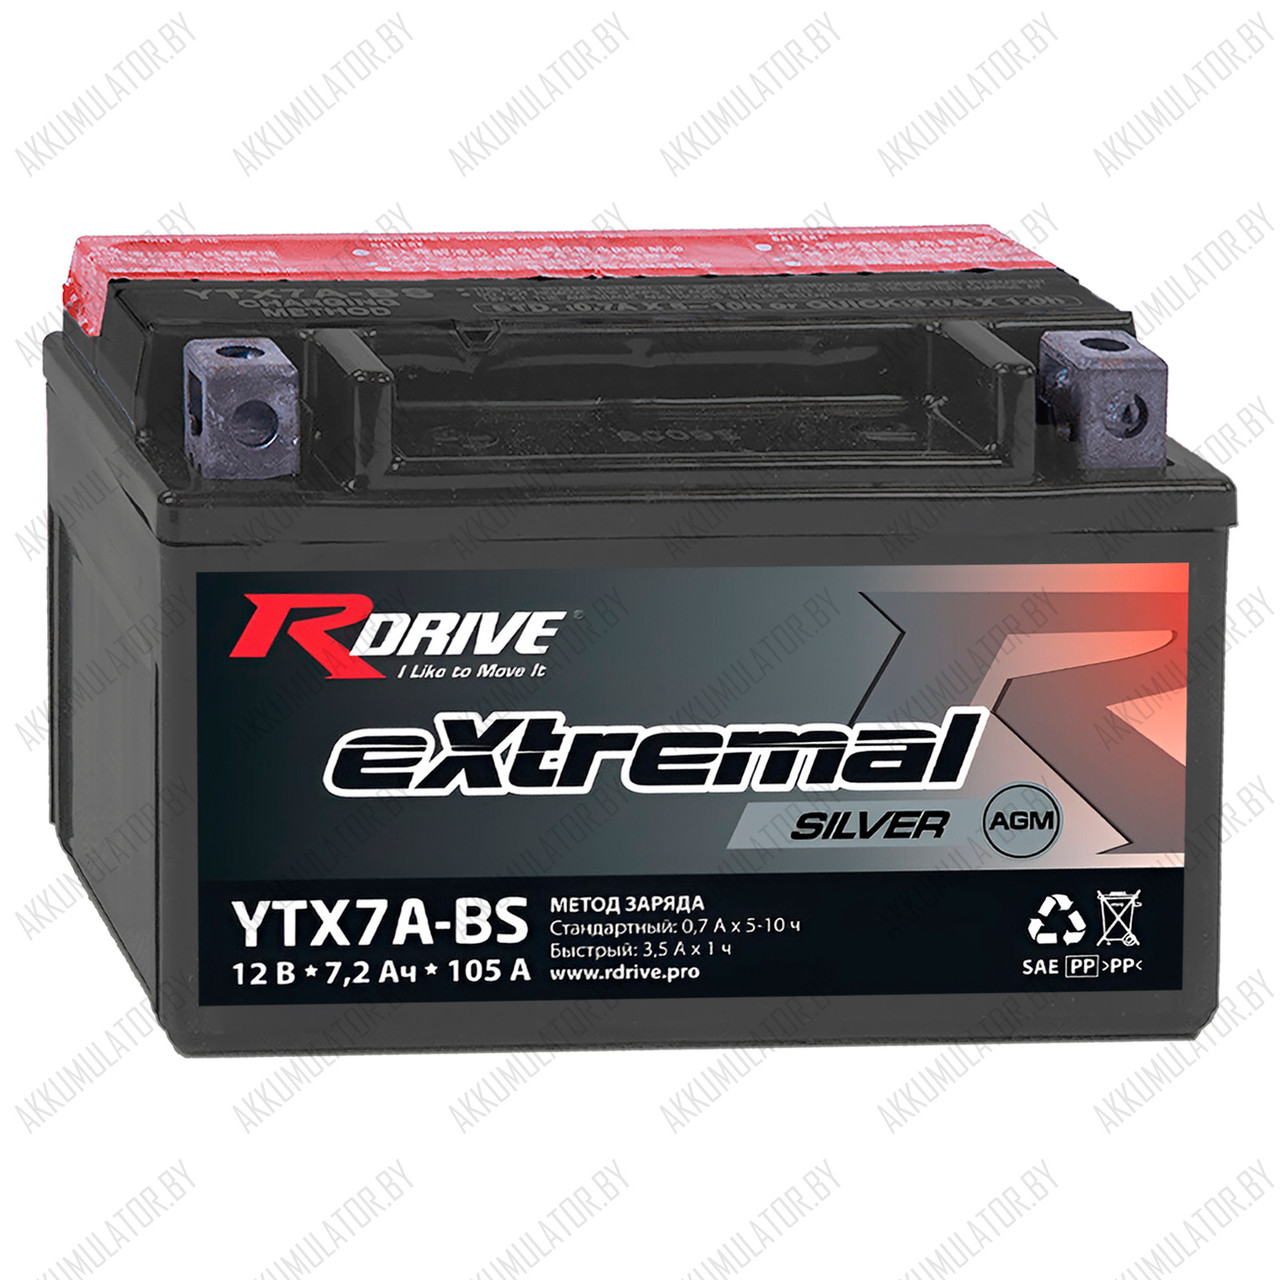 RDrive eXtremal Silver YTX7A-BS / 7,2Ah